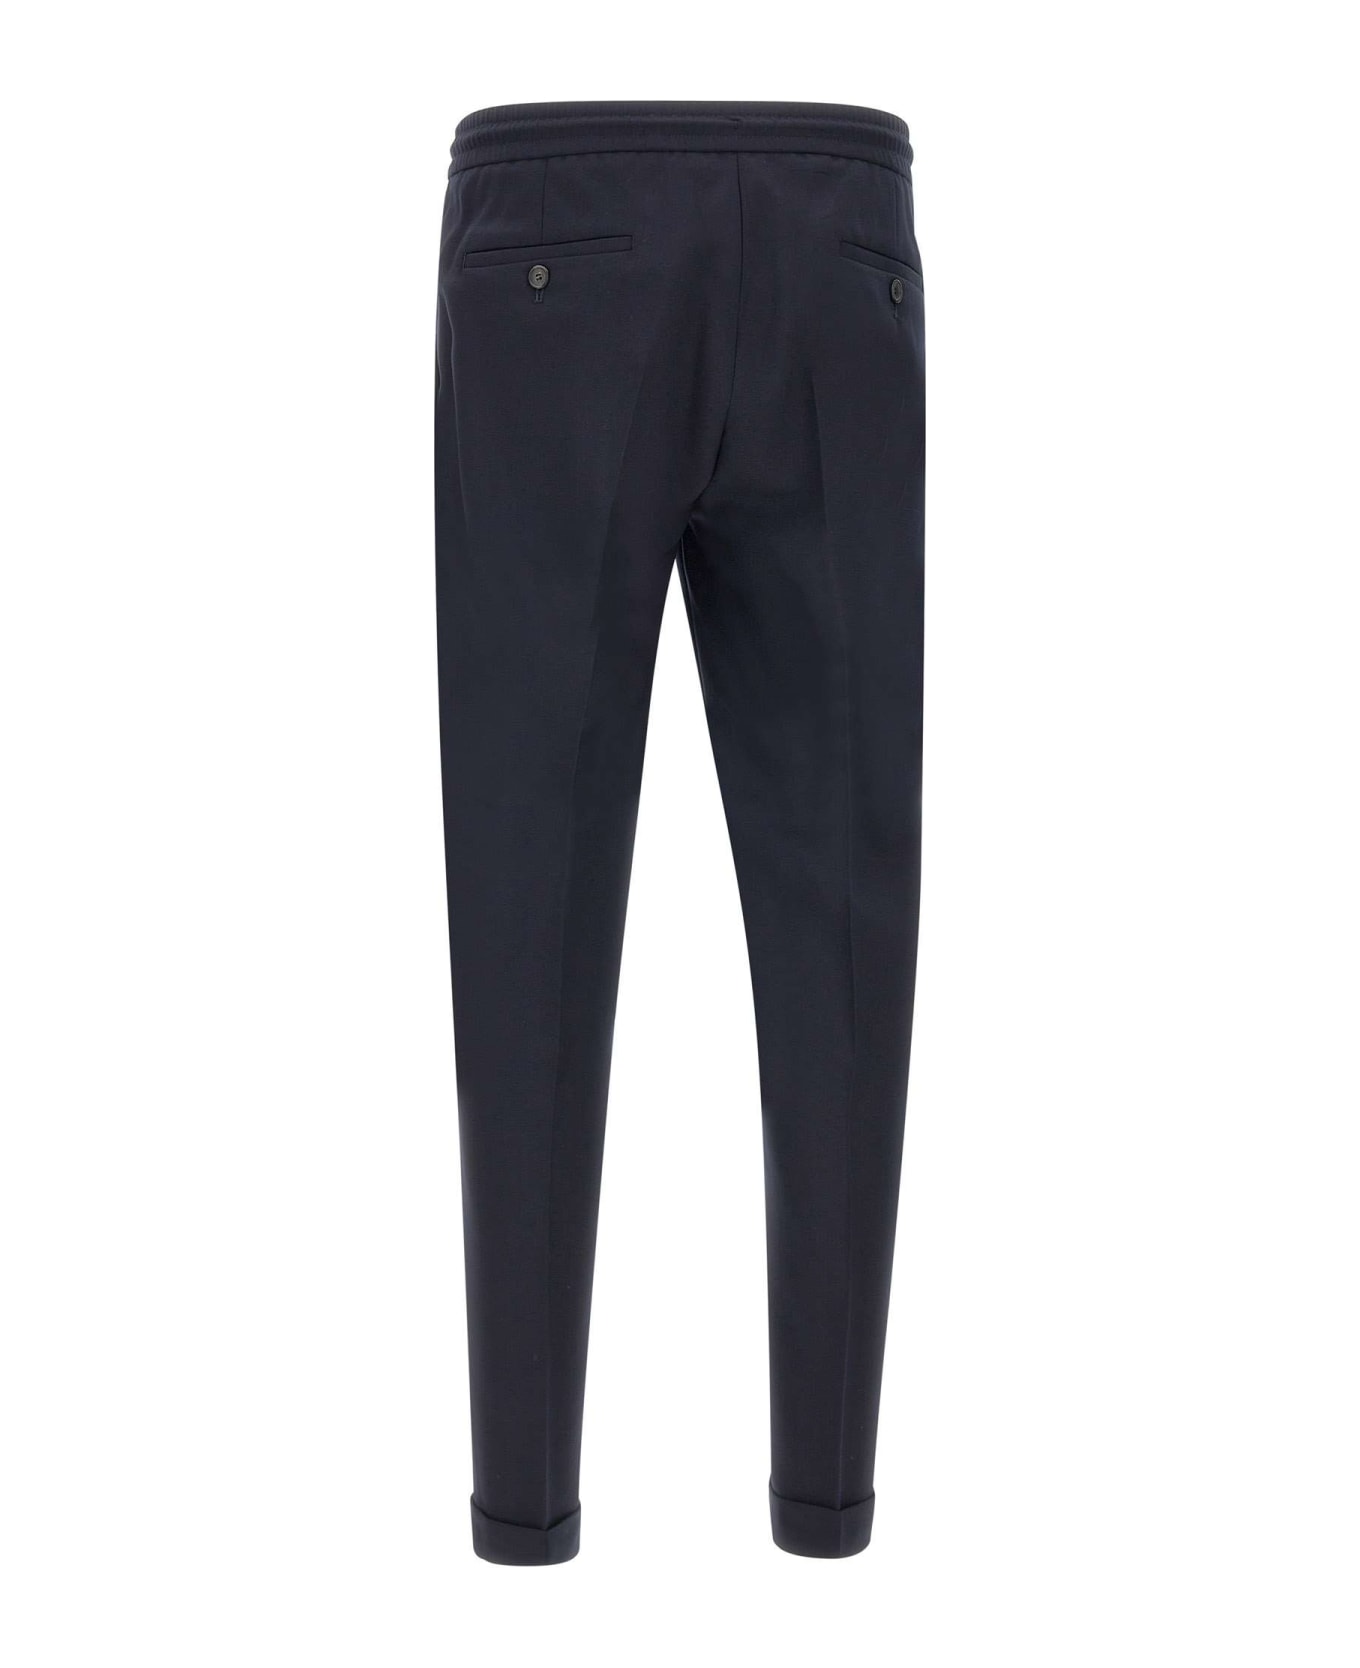 Paul Smith "a Suit To Travel In" Wool Trousers - BLUE ボトムス